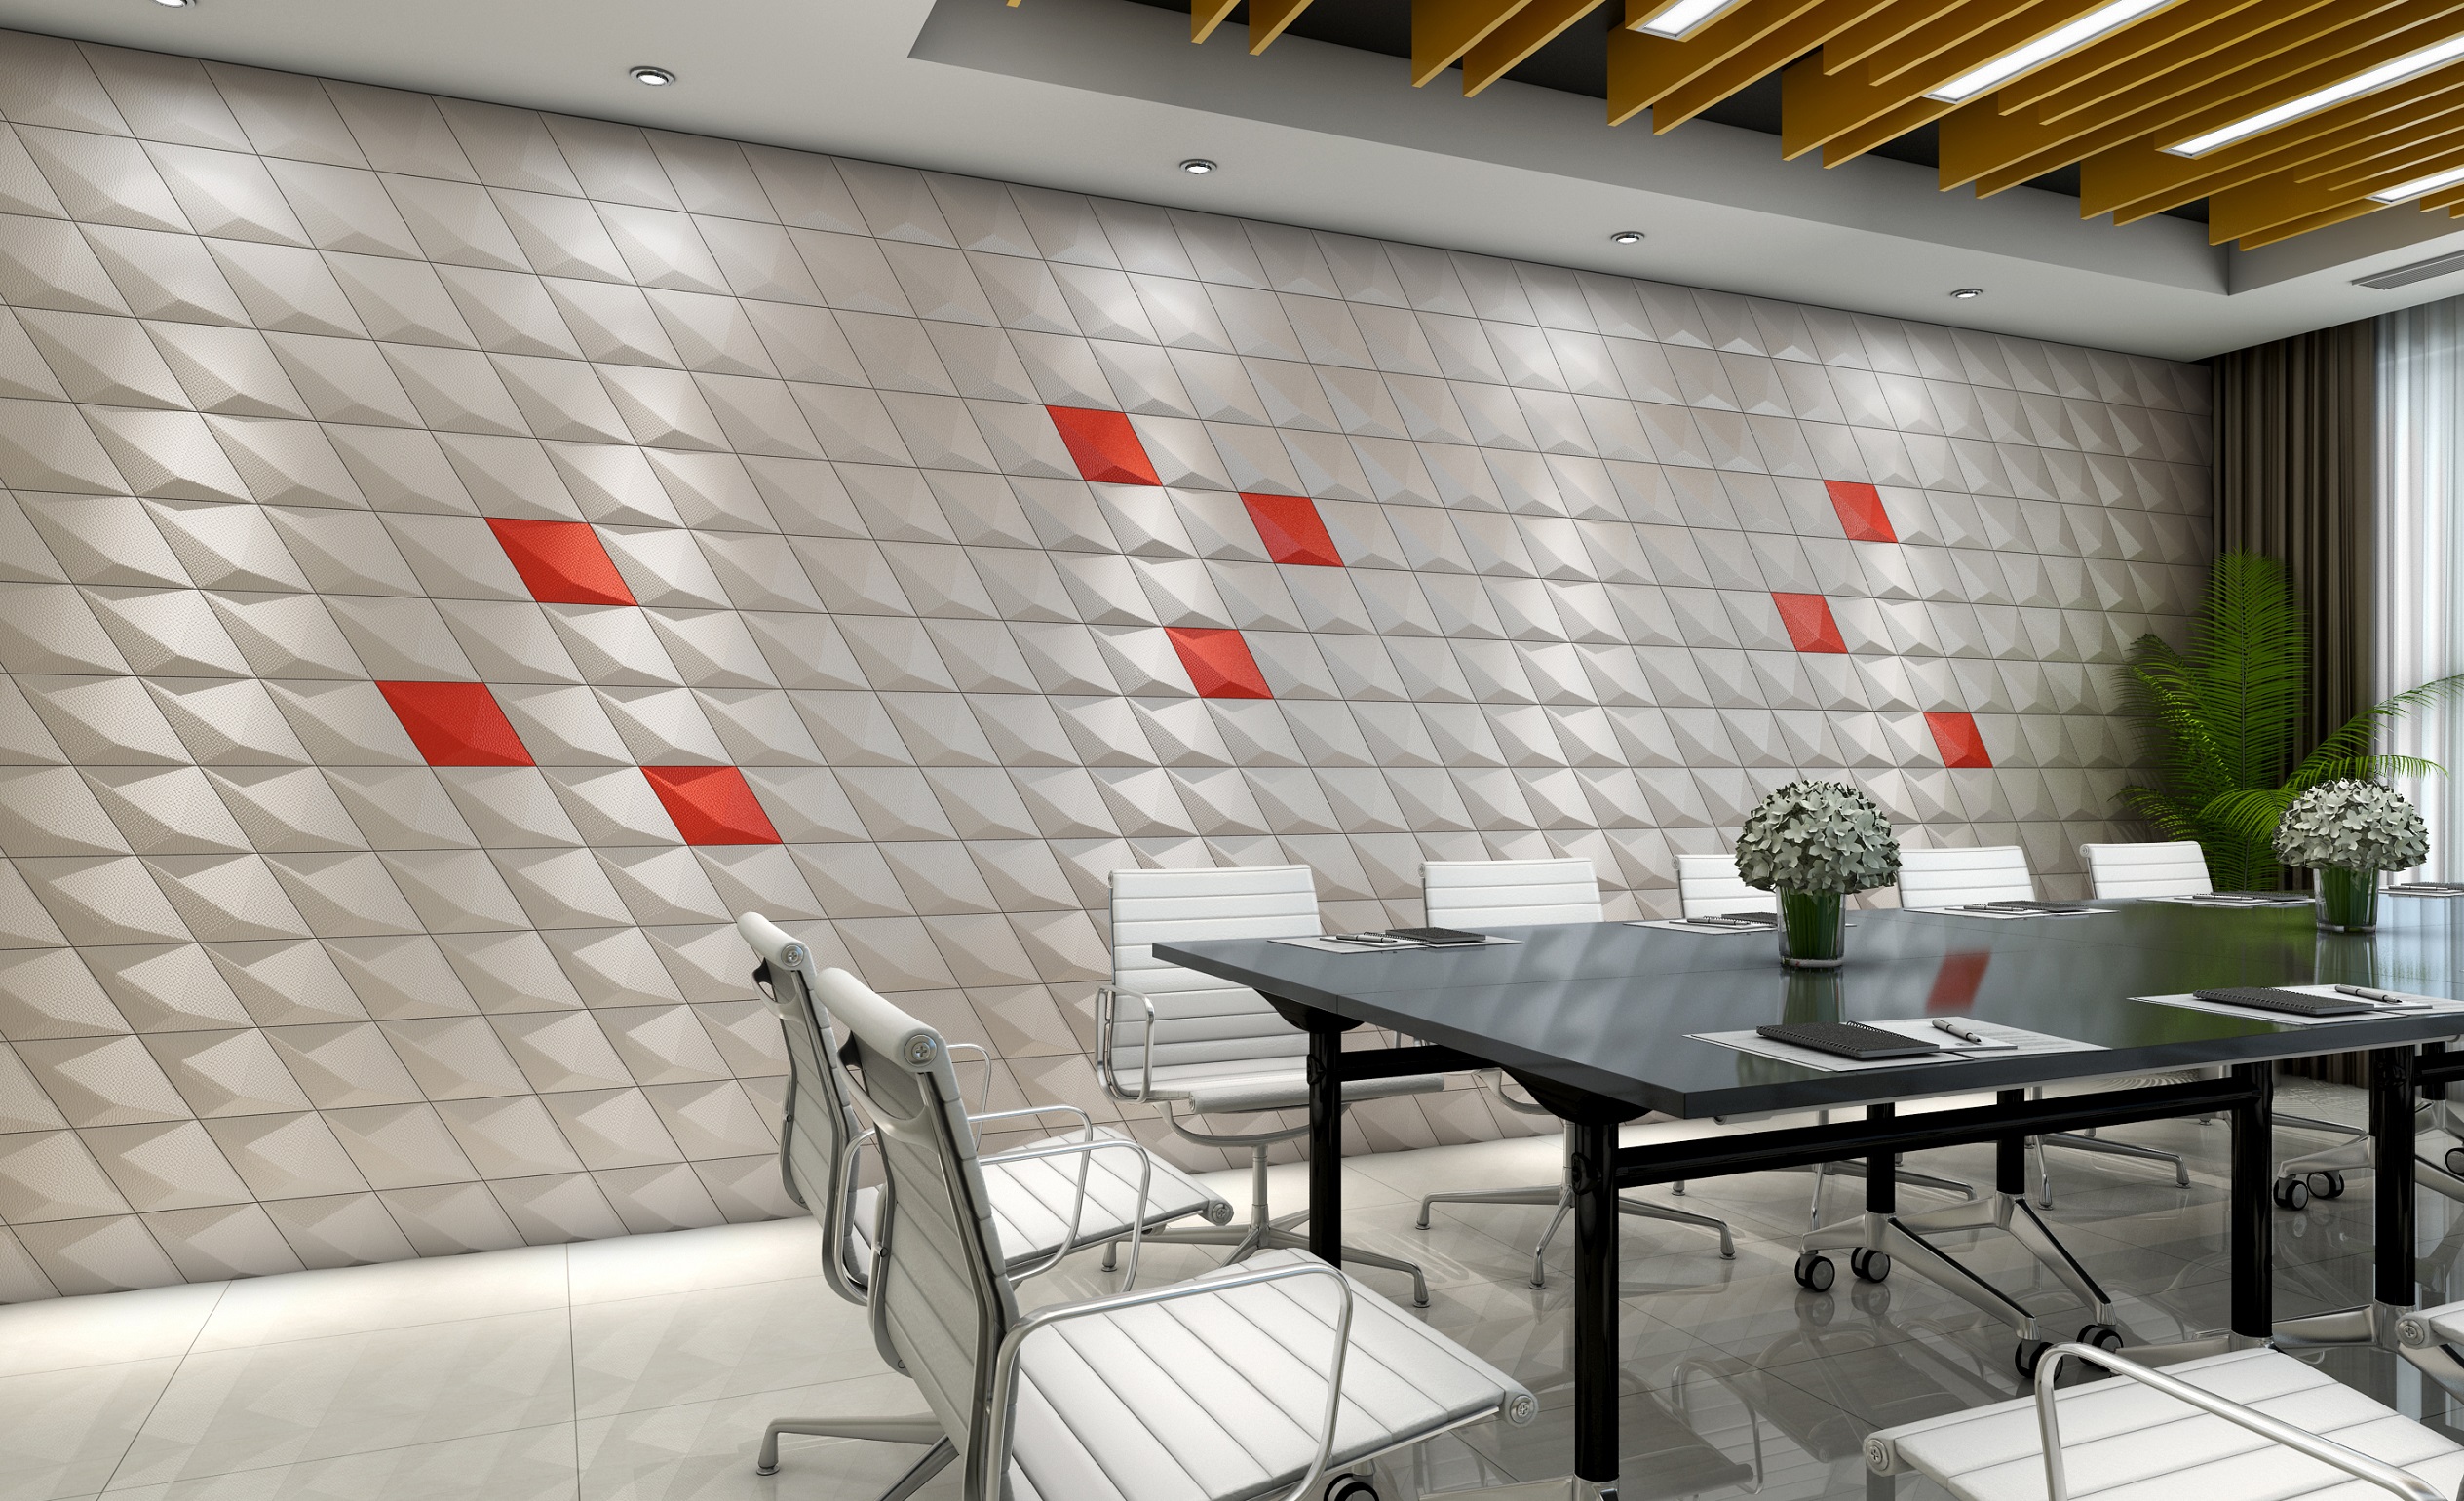 Pu Leather White Indoor 3D Mosaic Tile